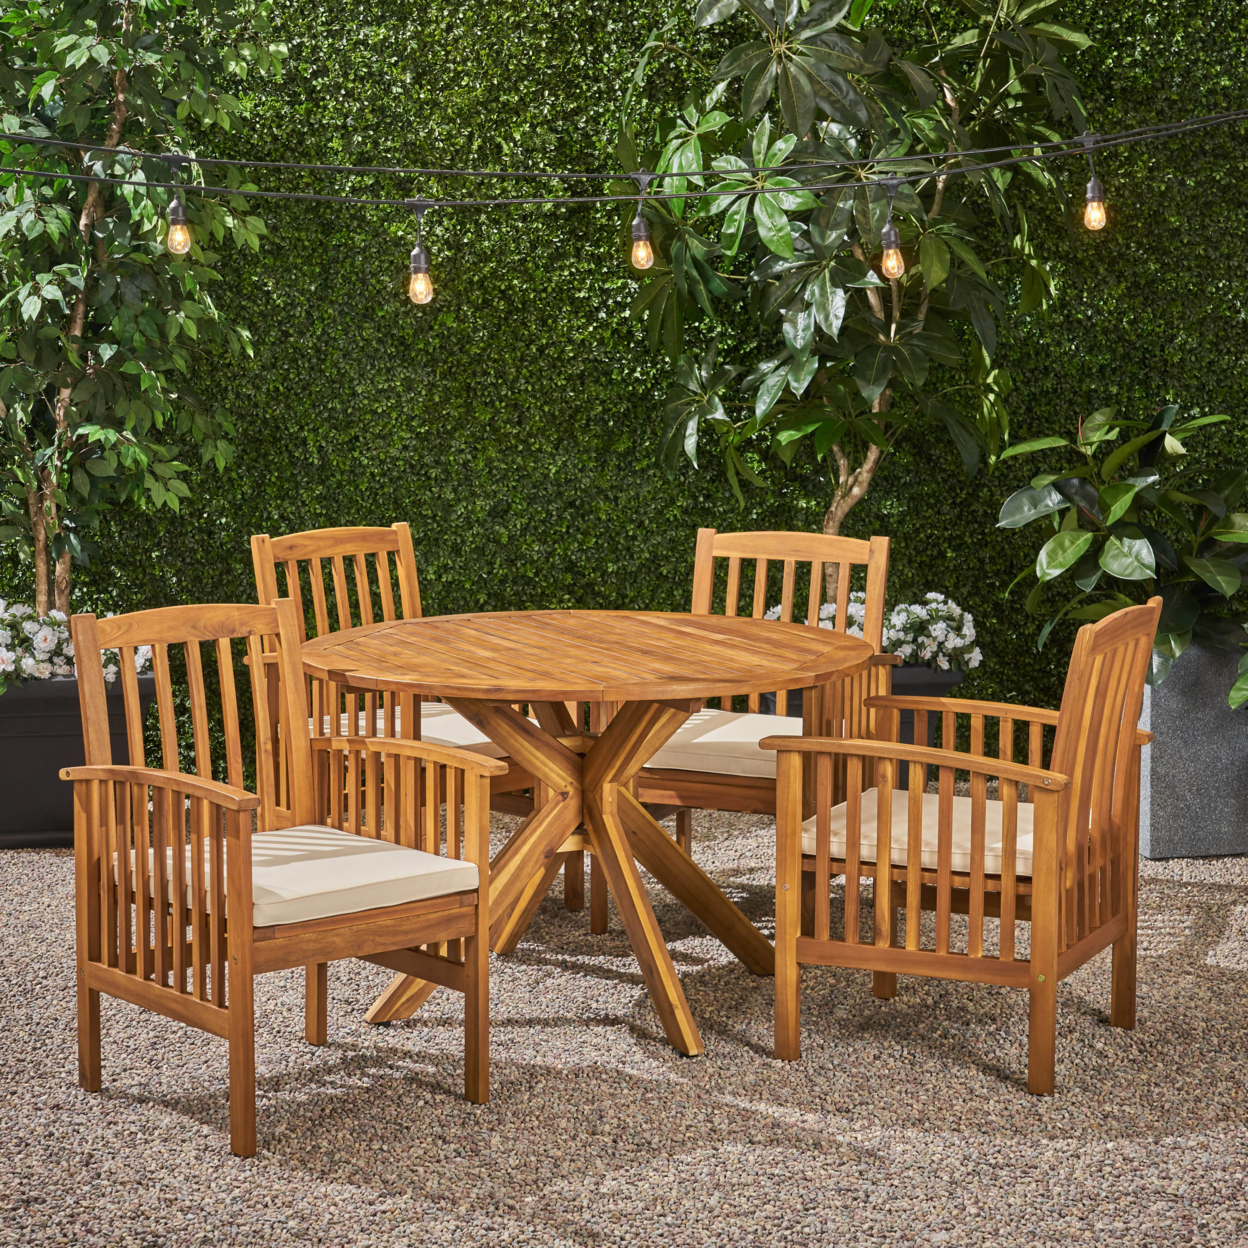 Phoenix Outdoor Acacia 4-Seater Dining Set With Cushions And 47 Round Table With X-Legs - Teak / Cream